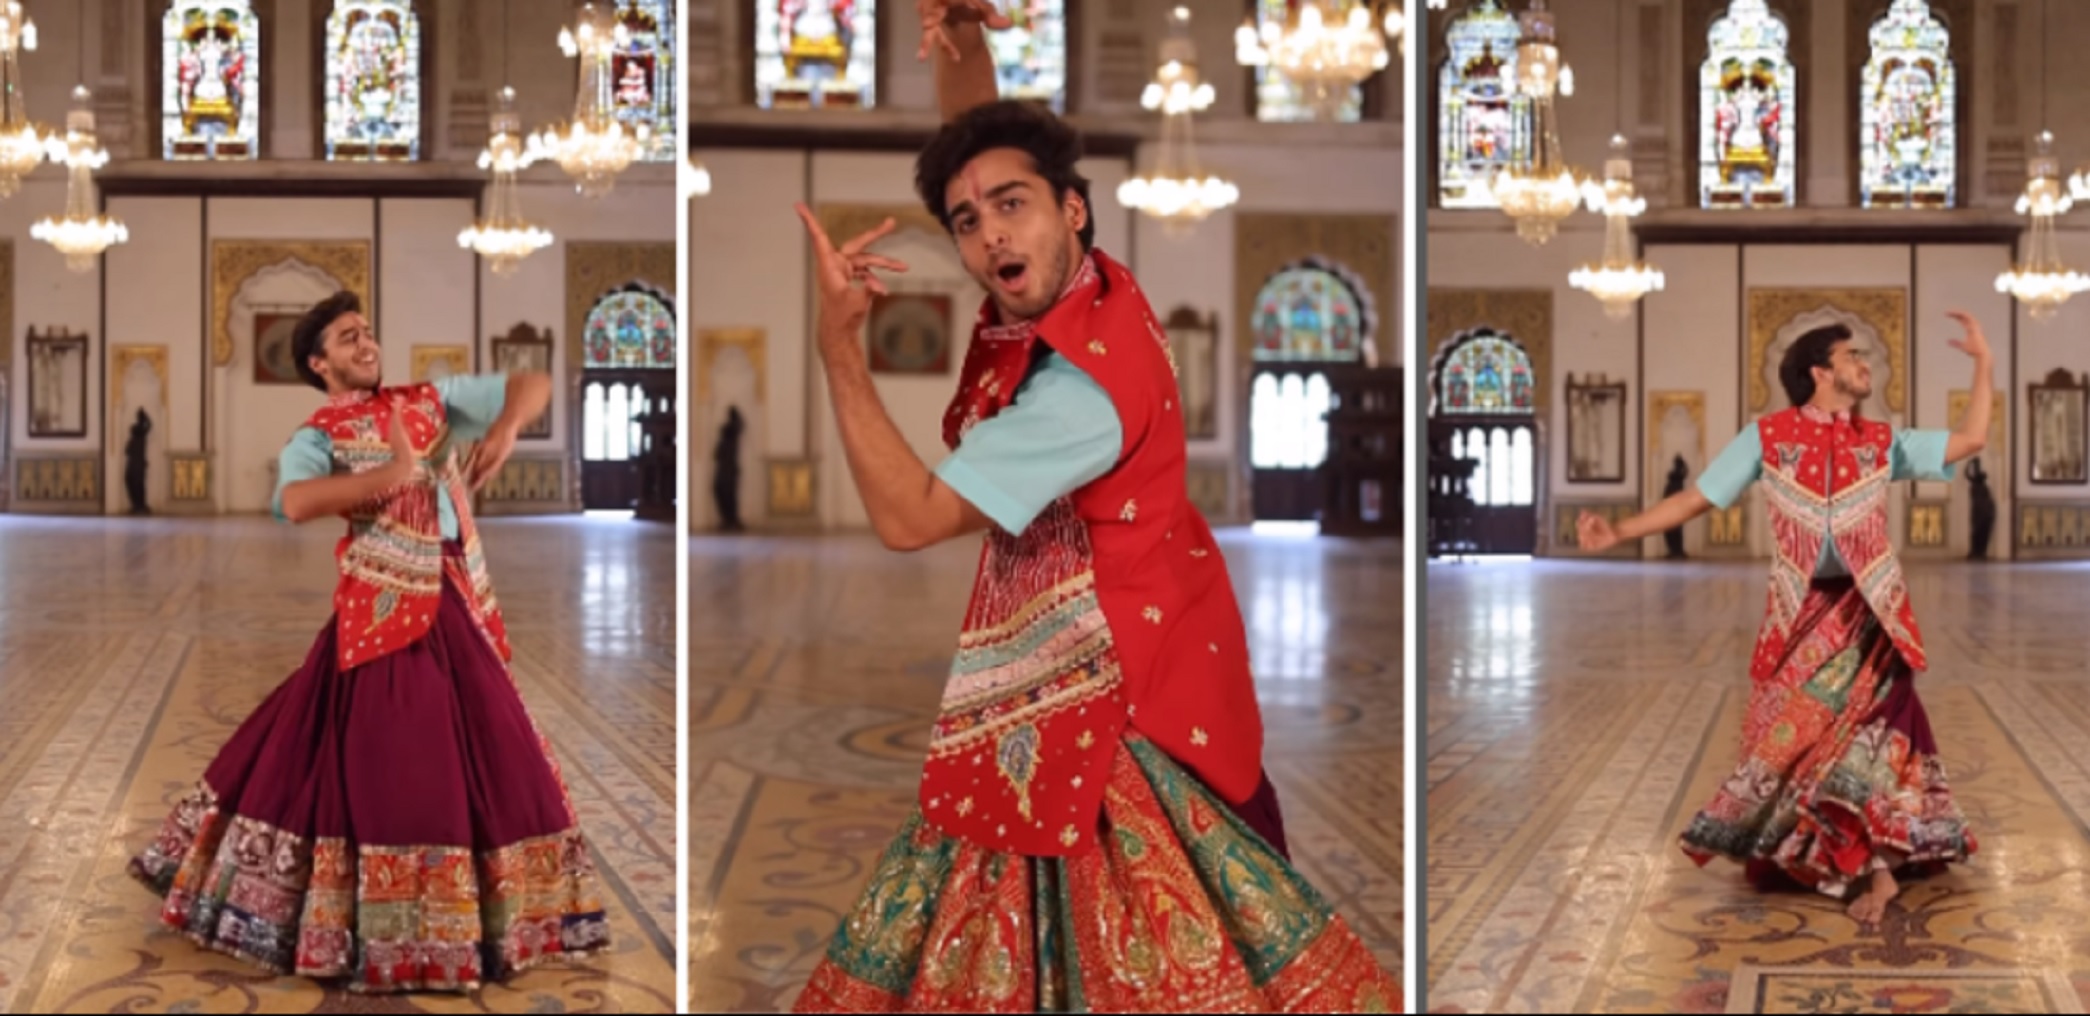 Man Dances On ‘Mere Dholna’ Wearing Skirt And Internet Thinks He Absolutely NAILED IT